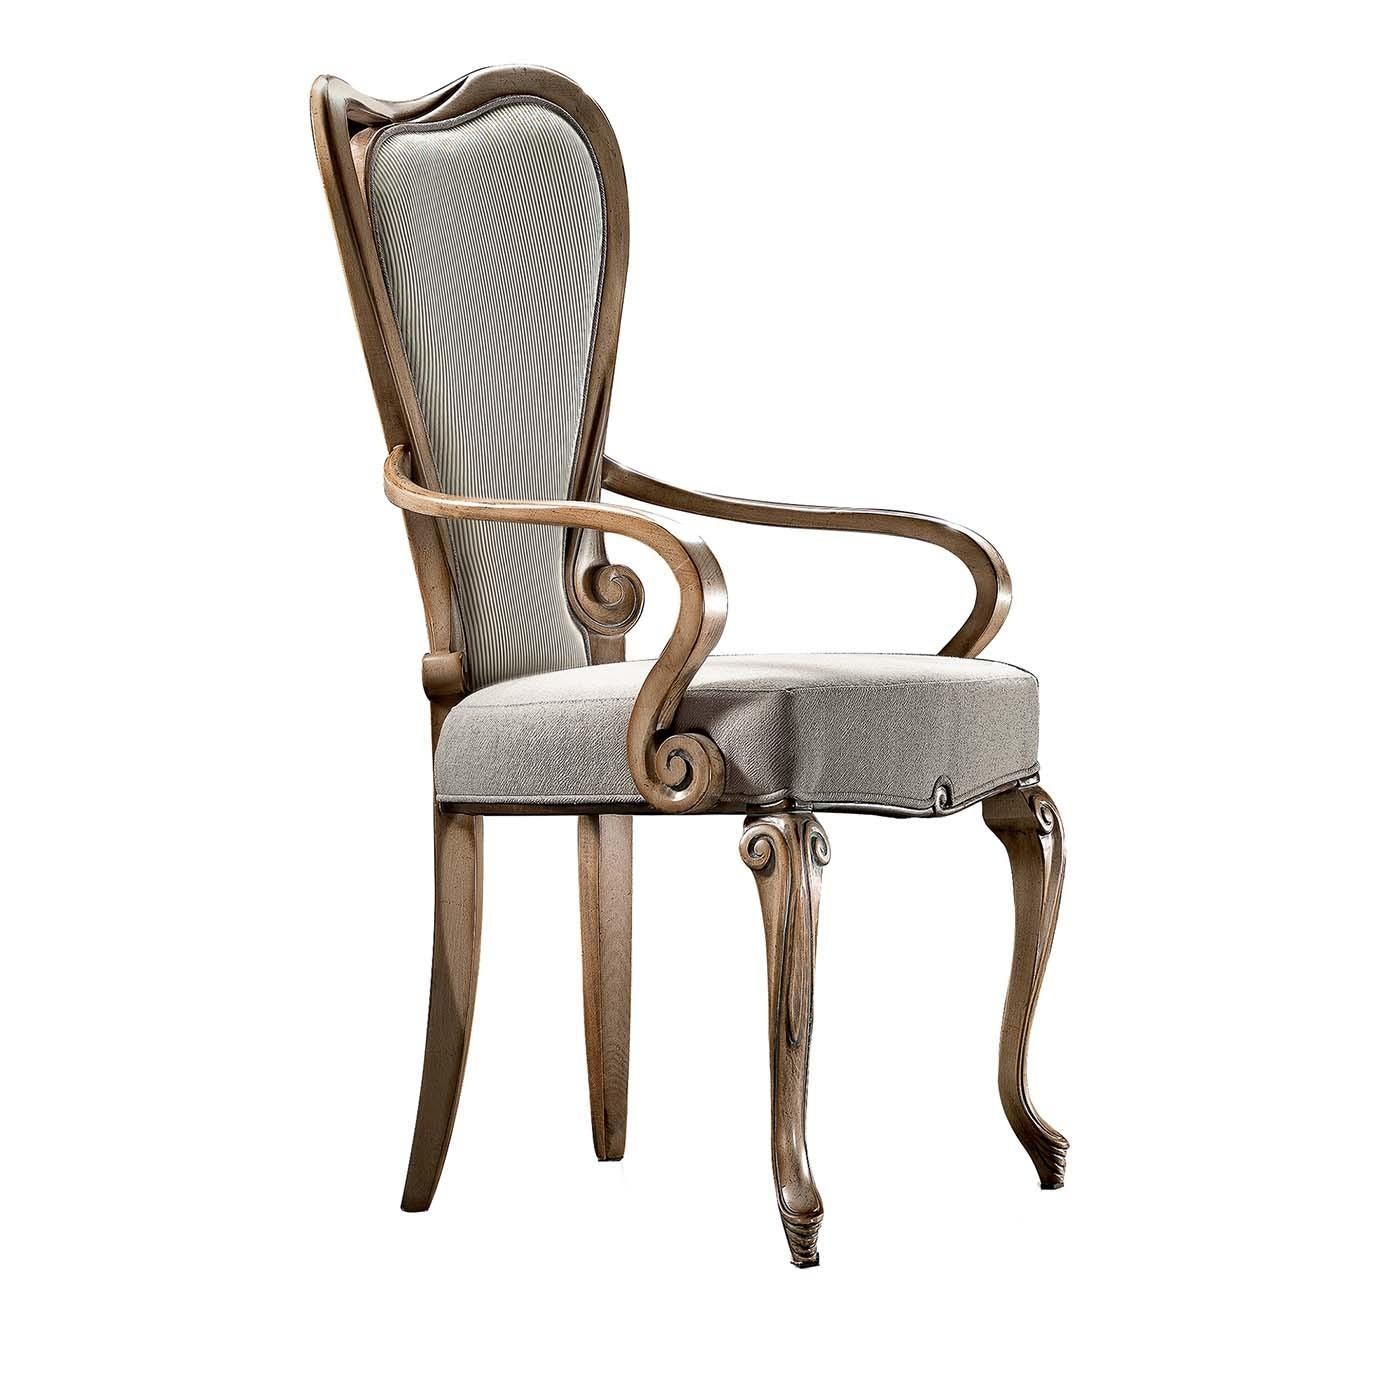 Dining chair with armrests in a rounded and harmonic design, finely crafted and finished in every small detail. A Fine example of a Baroque style dining chair with armrests and wooden frame that beautifully encircles the back, providing the elegant